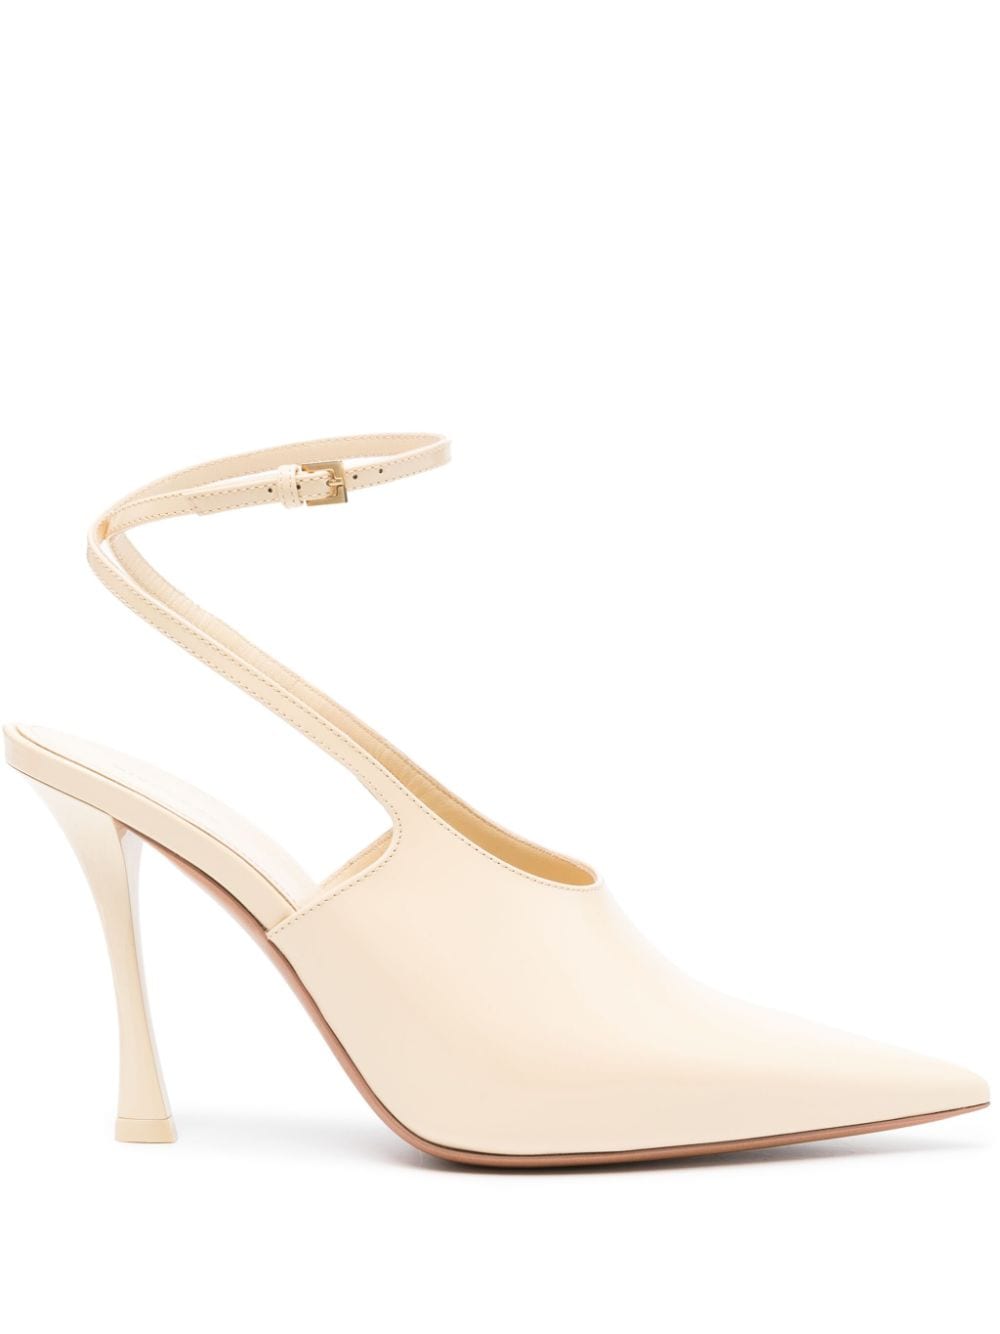 Givenchy Show 105mm Leather Pumps In Neutrals